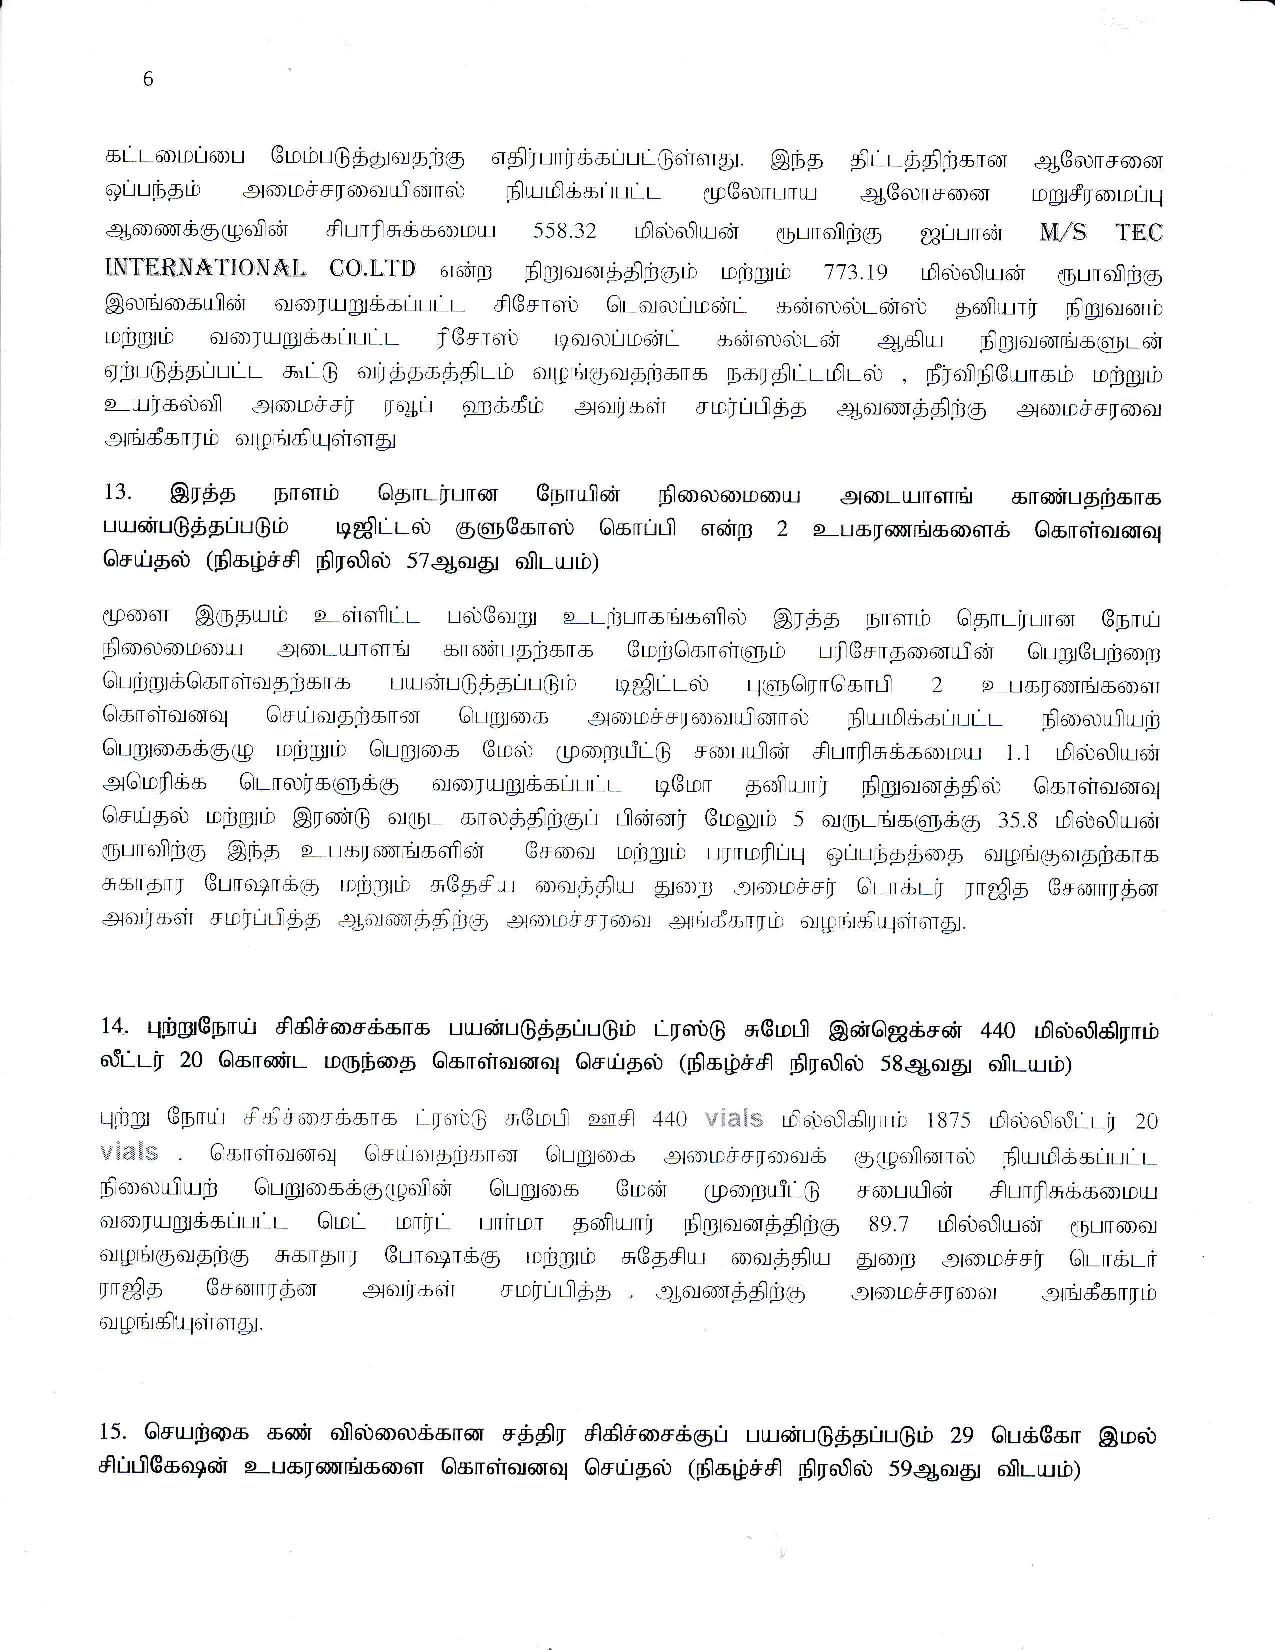 Cabinet Decision on 21.05.2019 Tamil page 007